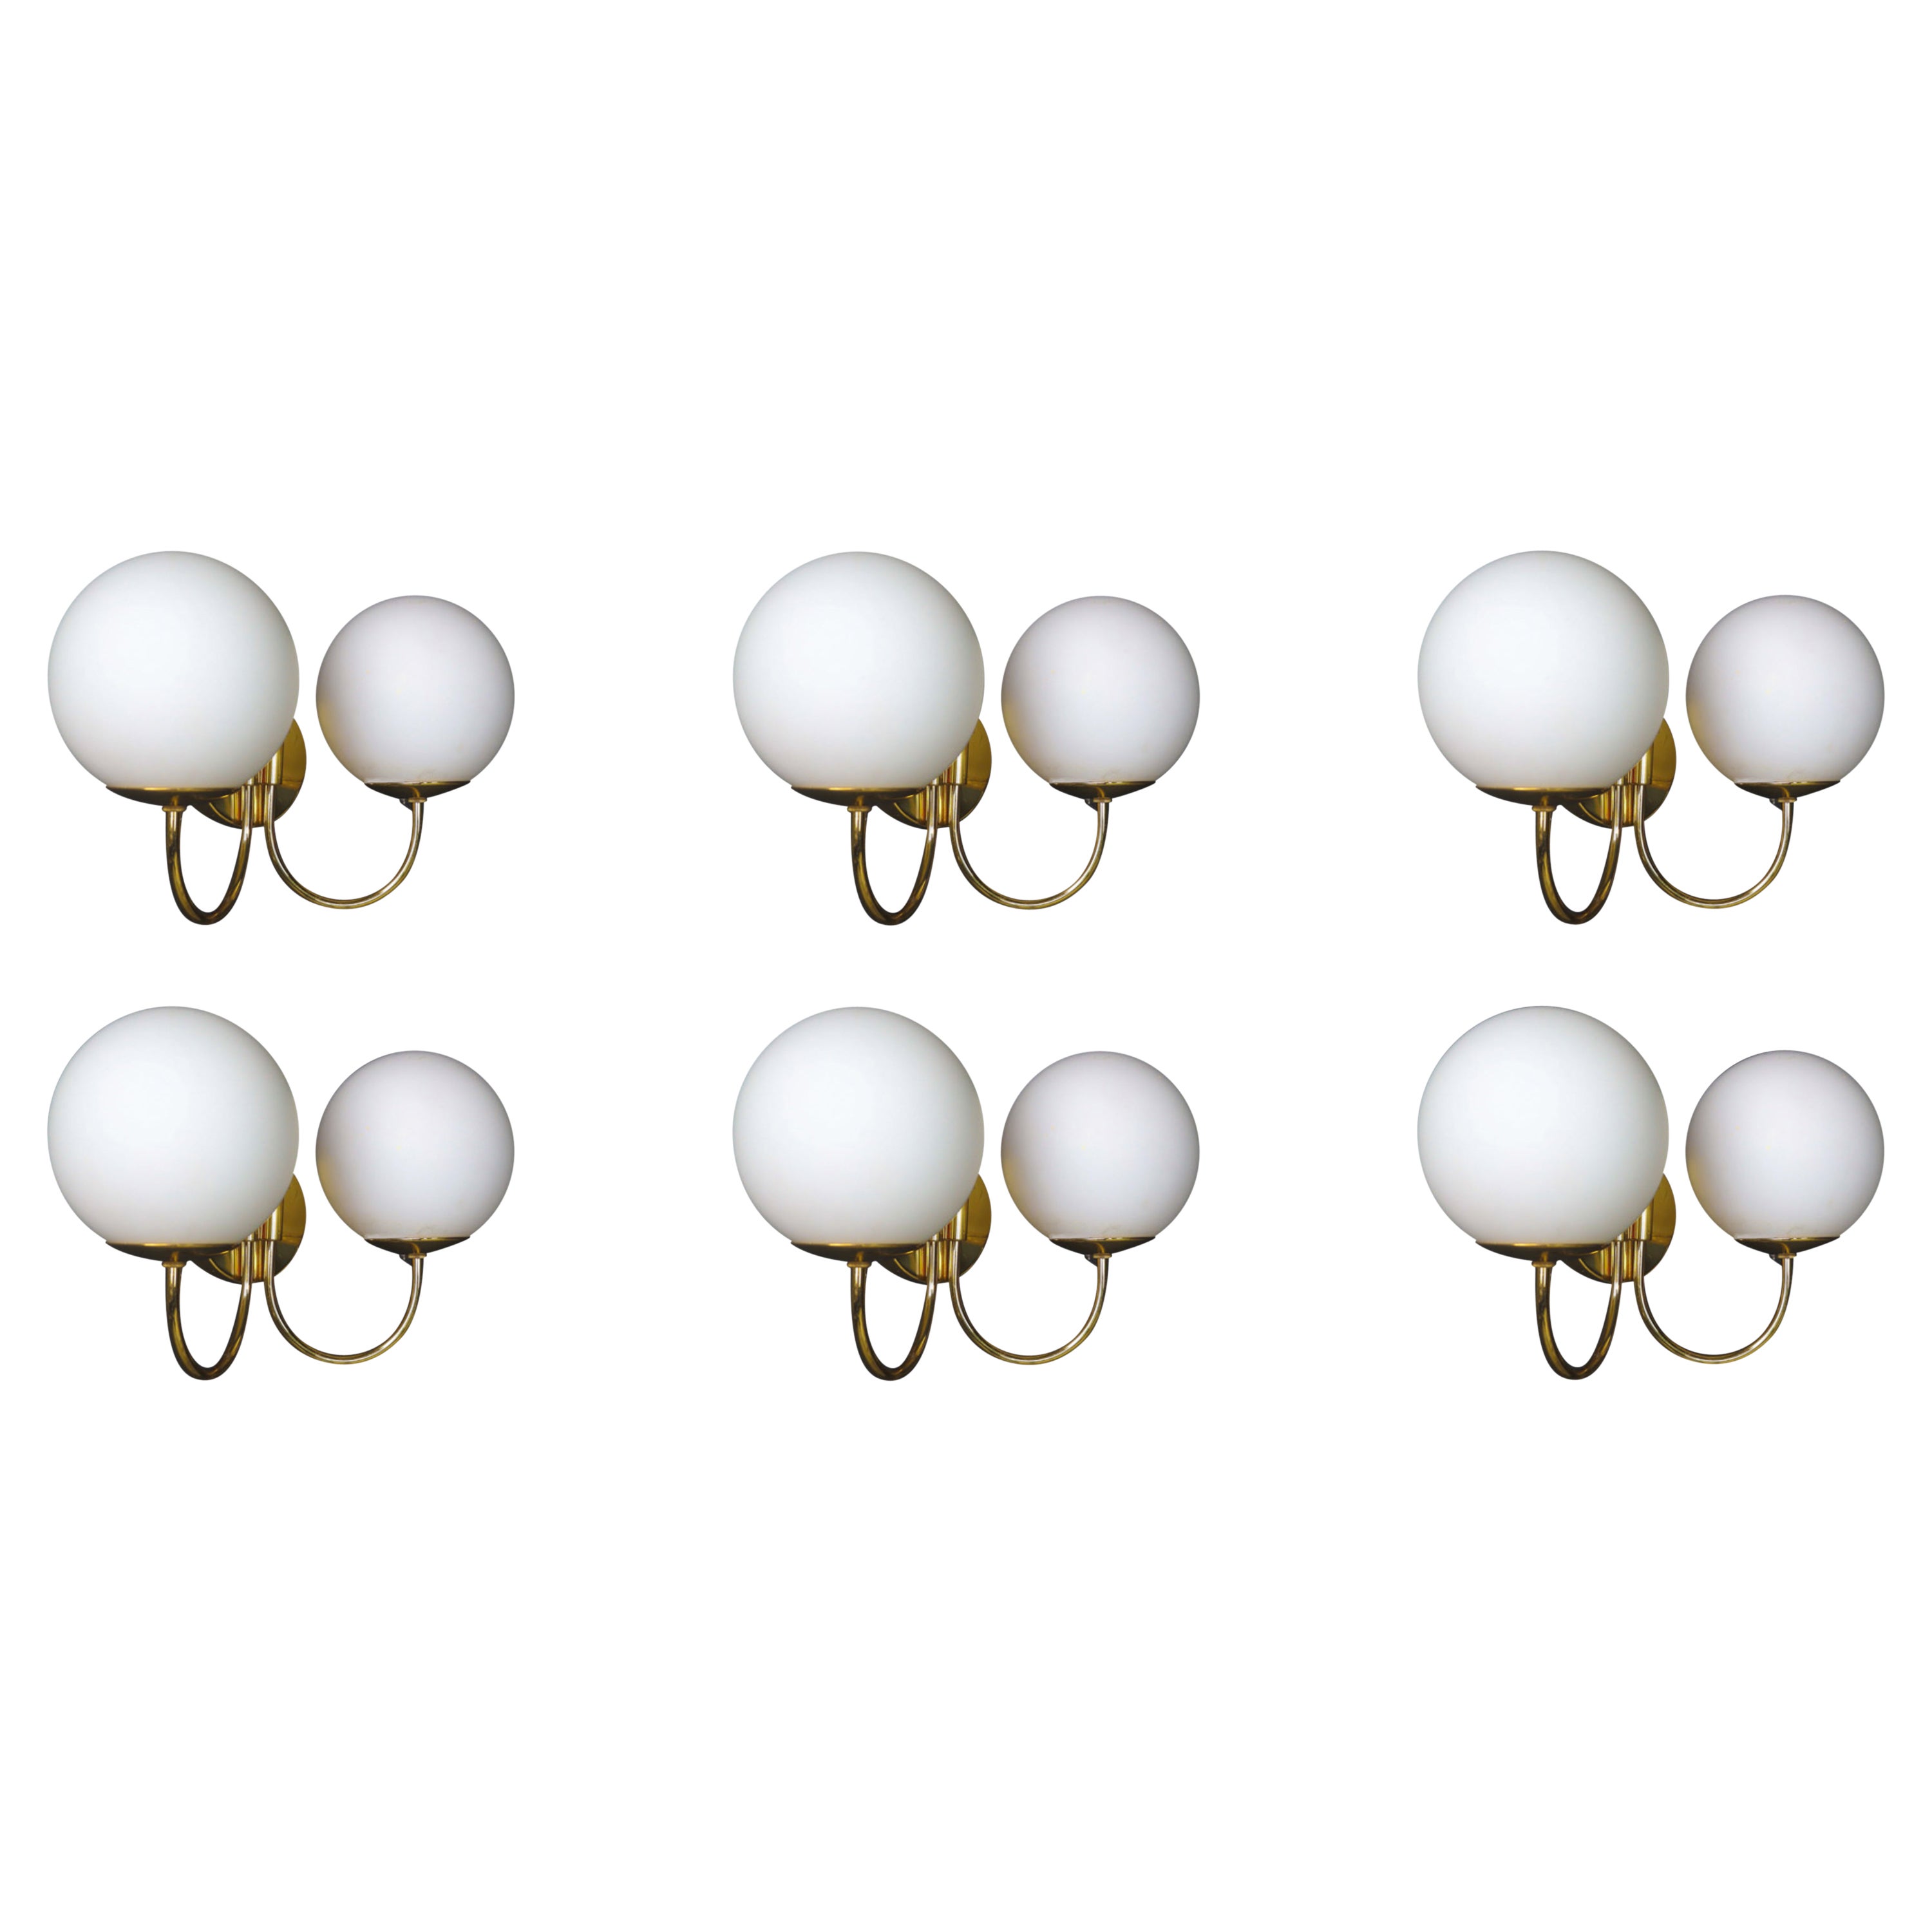 Elegant Sconces with Brass Fixtures and Opaline Glass Globes, Italy, 1960s For Sale